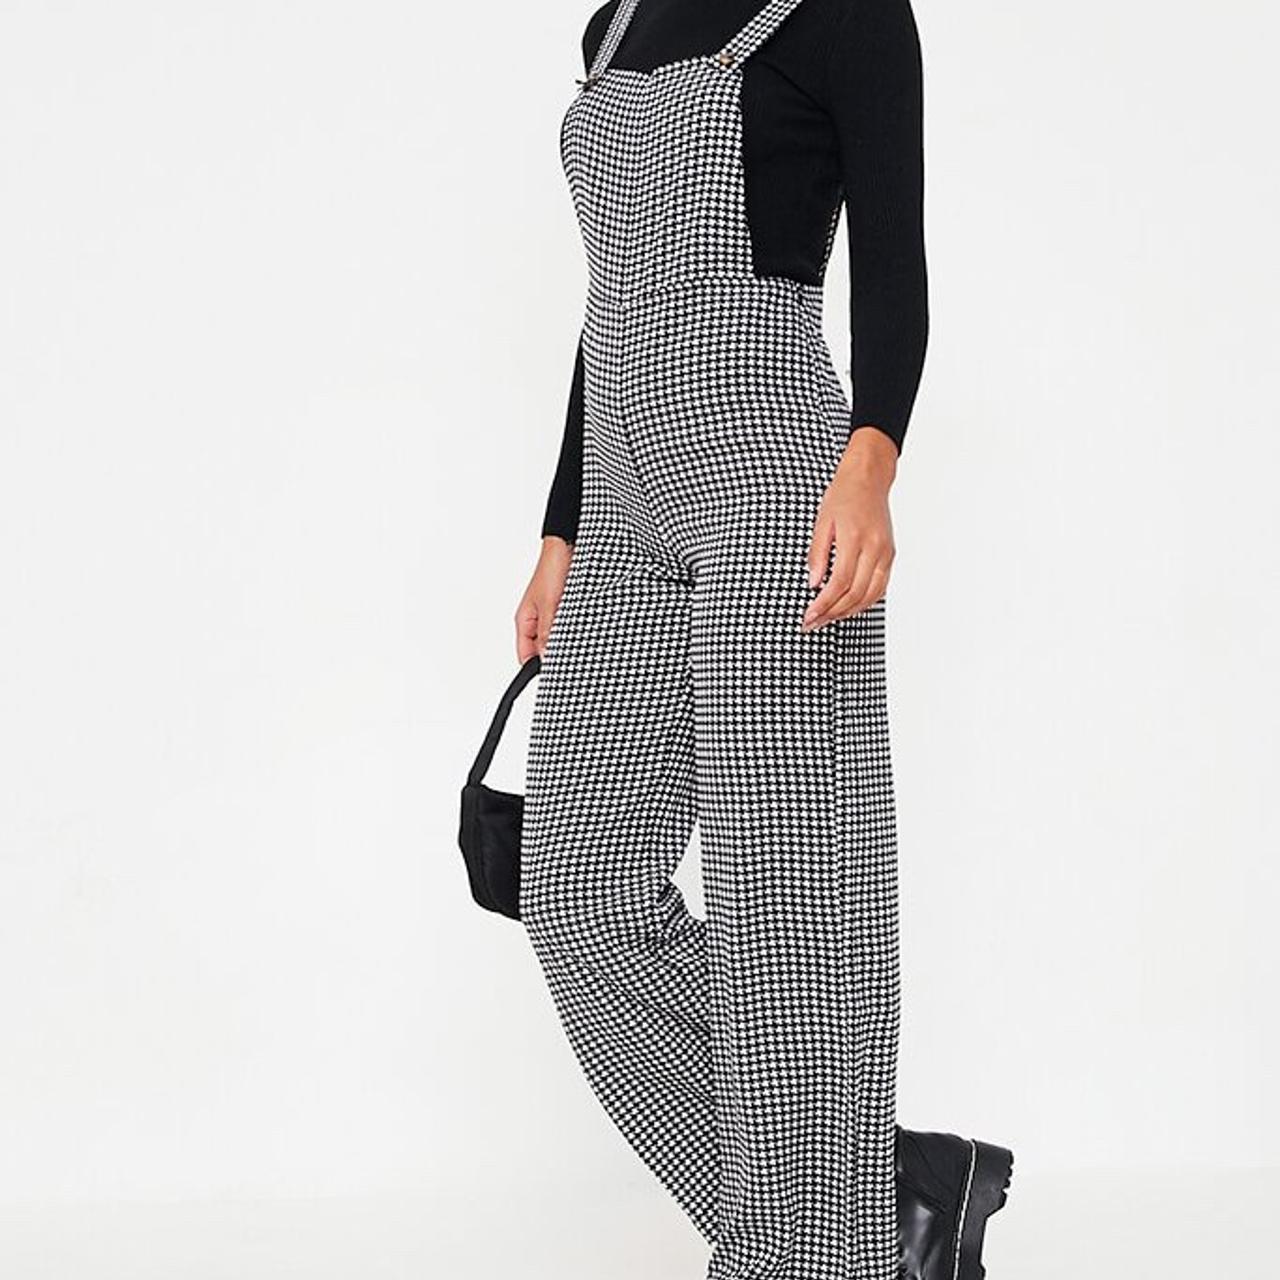 ‘Black woven dogtooth print jumpsuit in a dungaree... - Depop